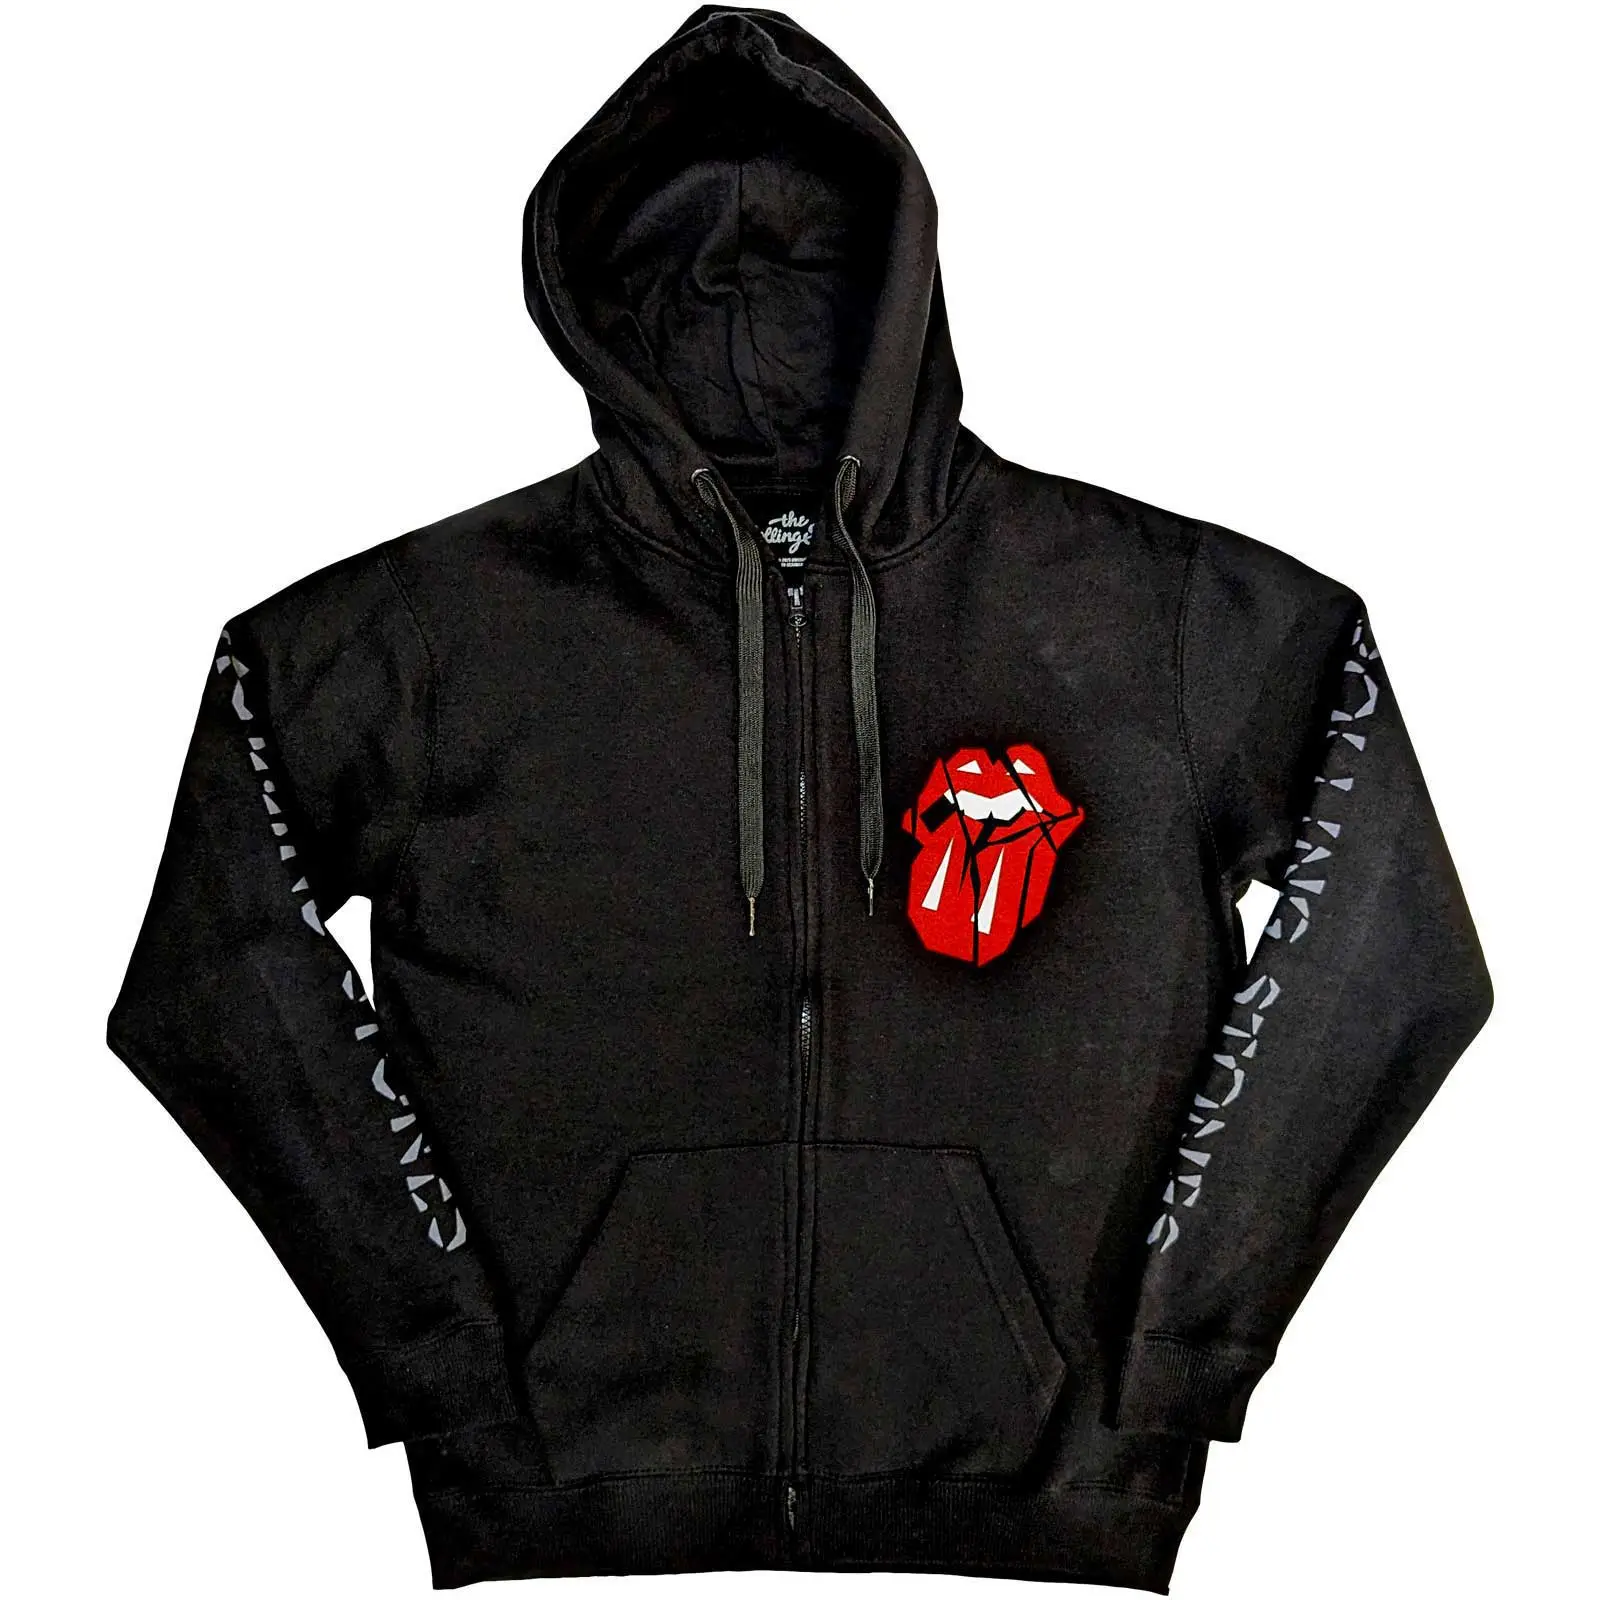 The Rolling Stones - The Rolling Stones Unisex Zipped Hoodie: Hackney Diamonds Shattered Tongue (Sleeve Print)  Hackney Diamonds Shattered Tongue Long Sleeves artwork